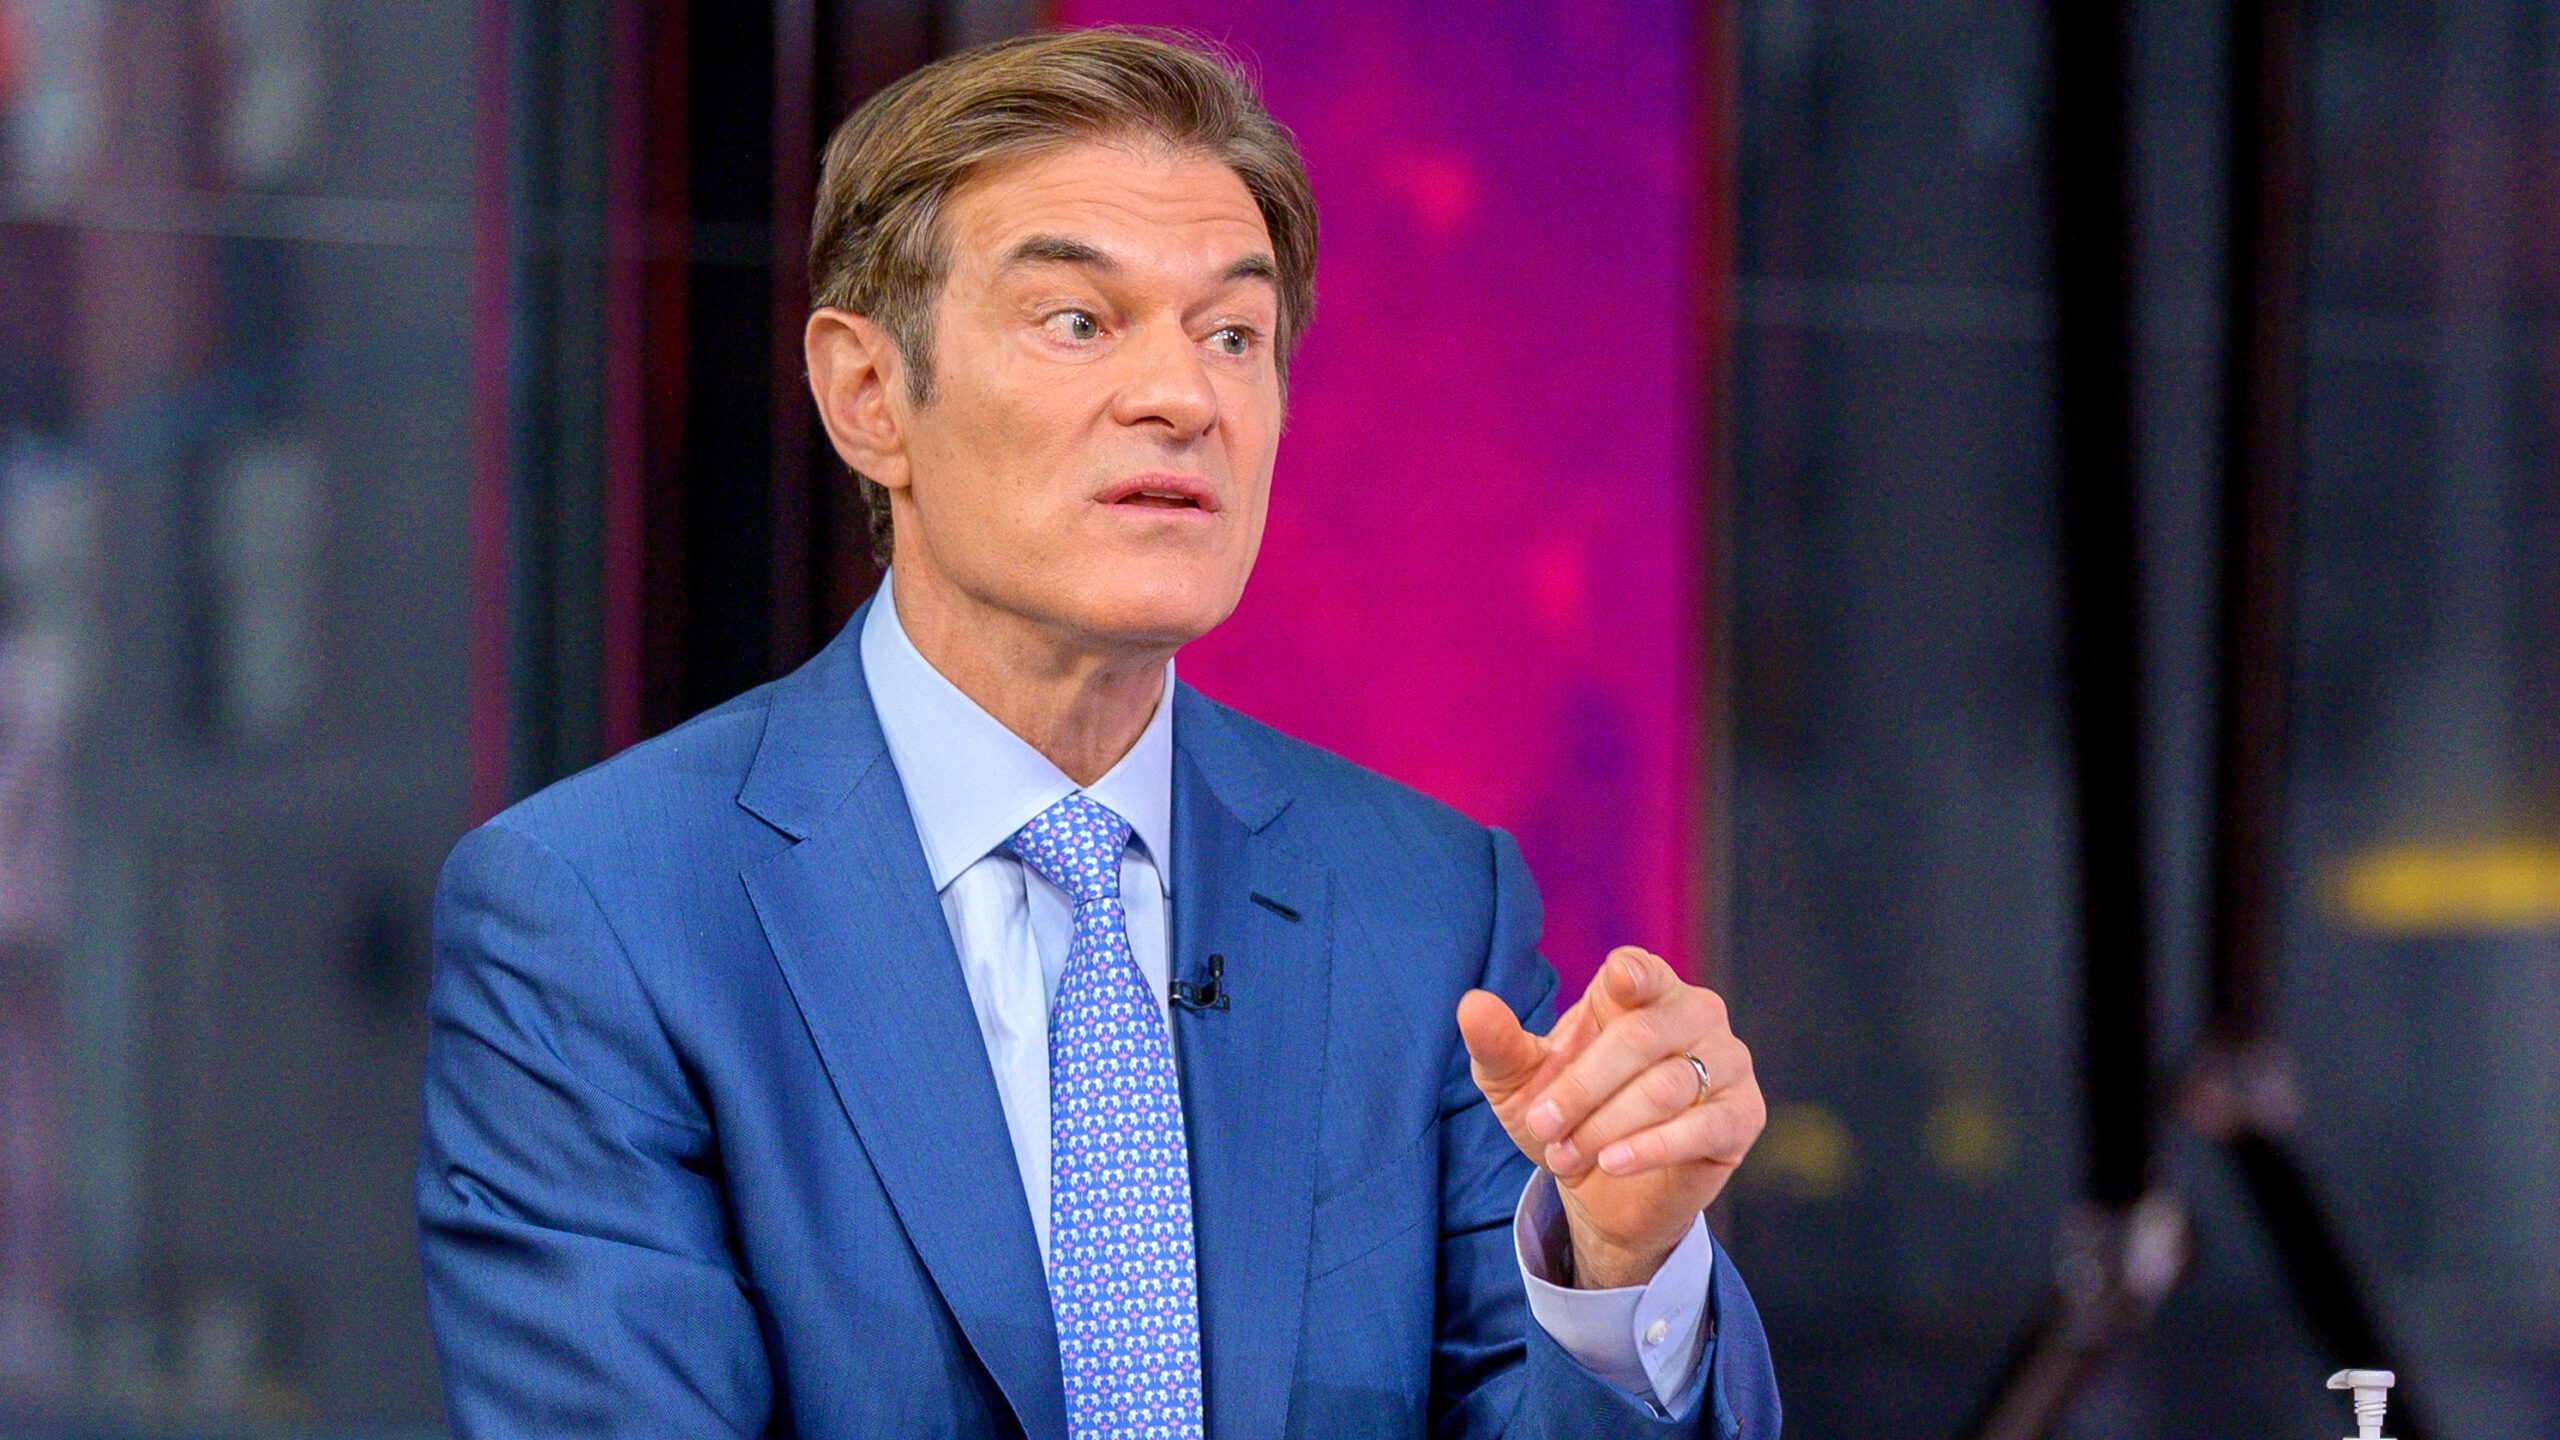 GOP Senate Candidate Dr Oz Steps In To Help Passenger With Medical Emergency On Flight